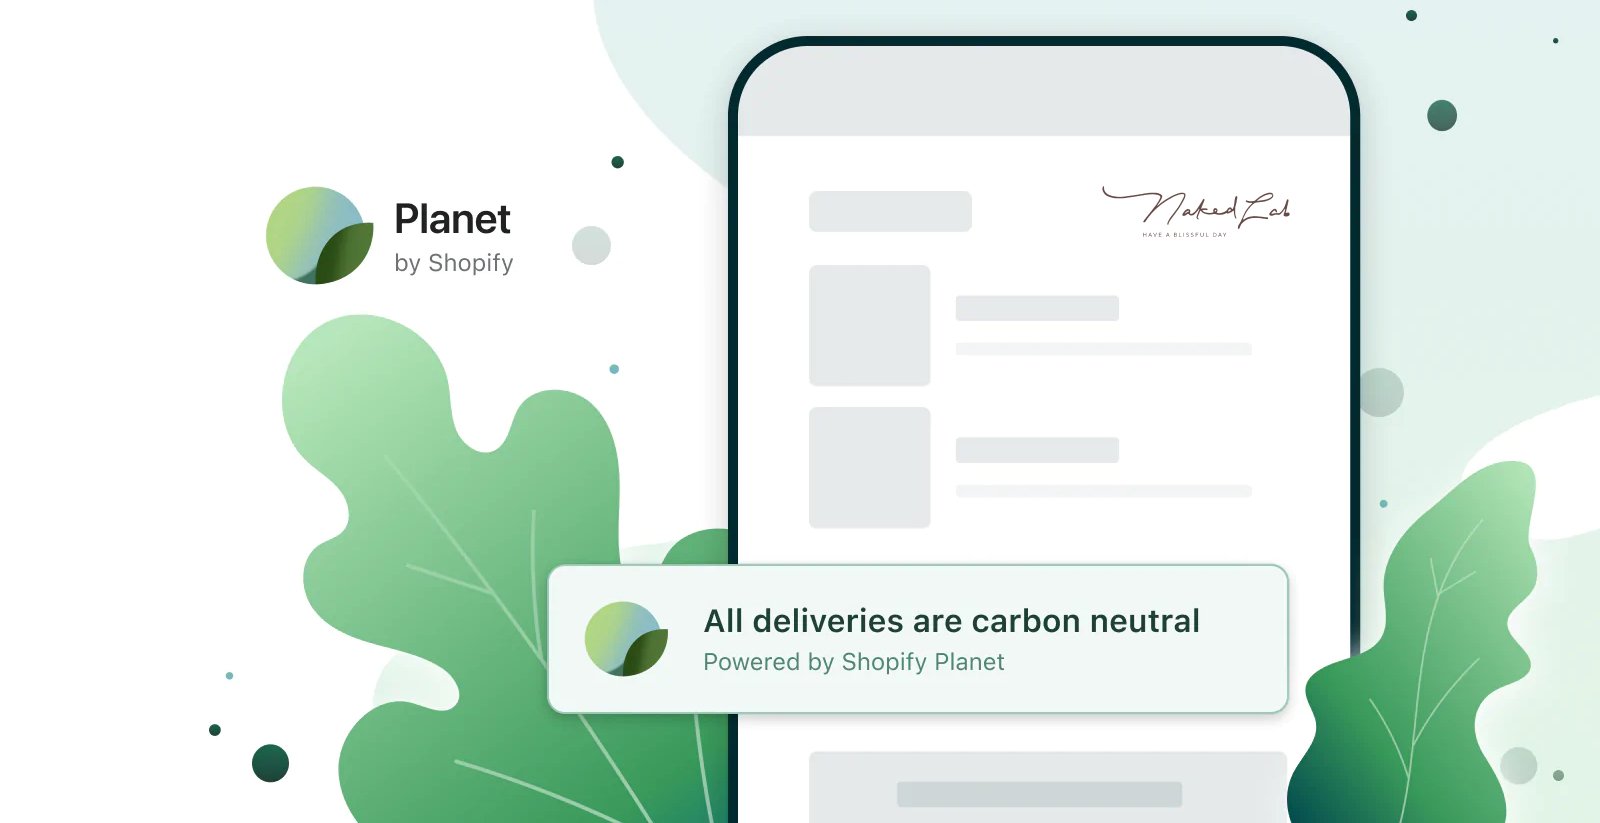 NakedLab is now using Planet - Carbon-neutral shipping 🌿🌏 - NakedLab